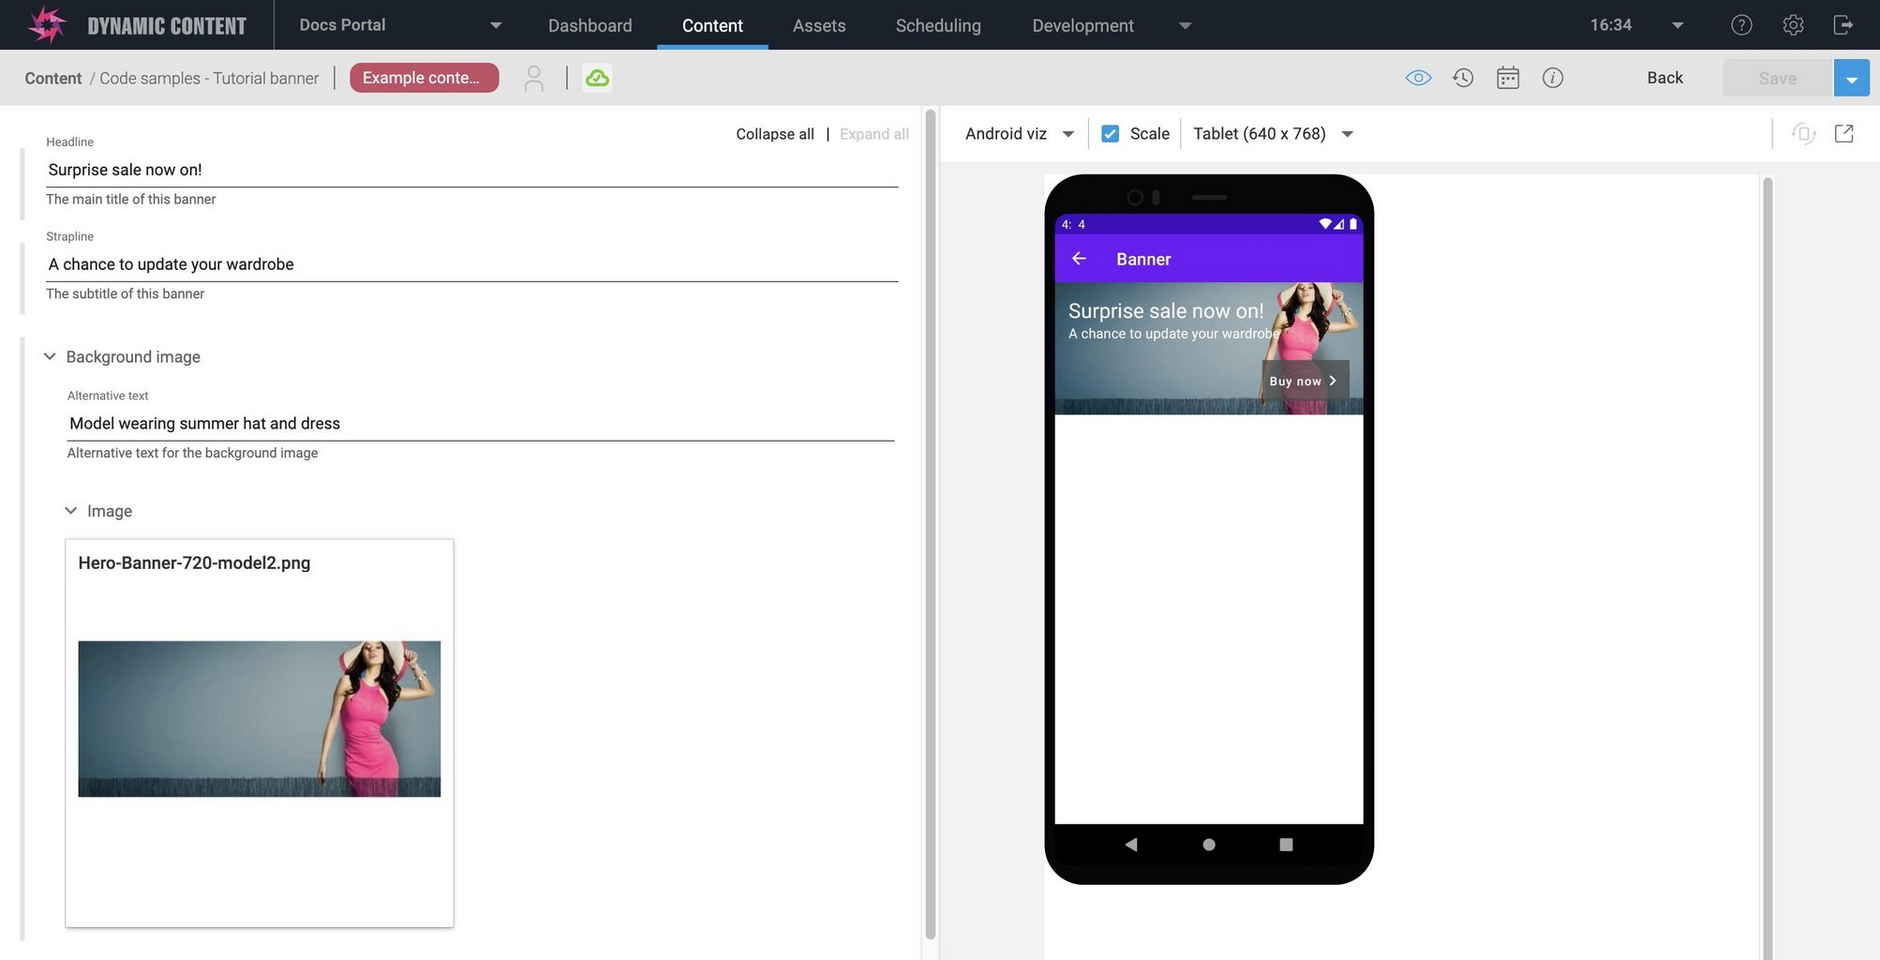 The banner visualization shown in an Android simulator alongside the content form